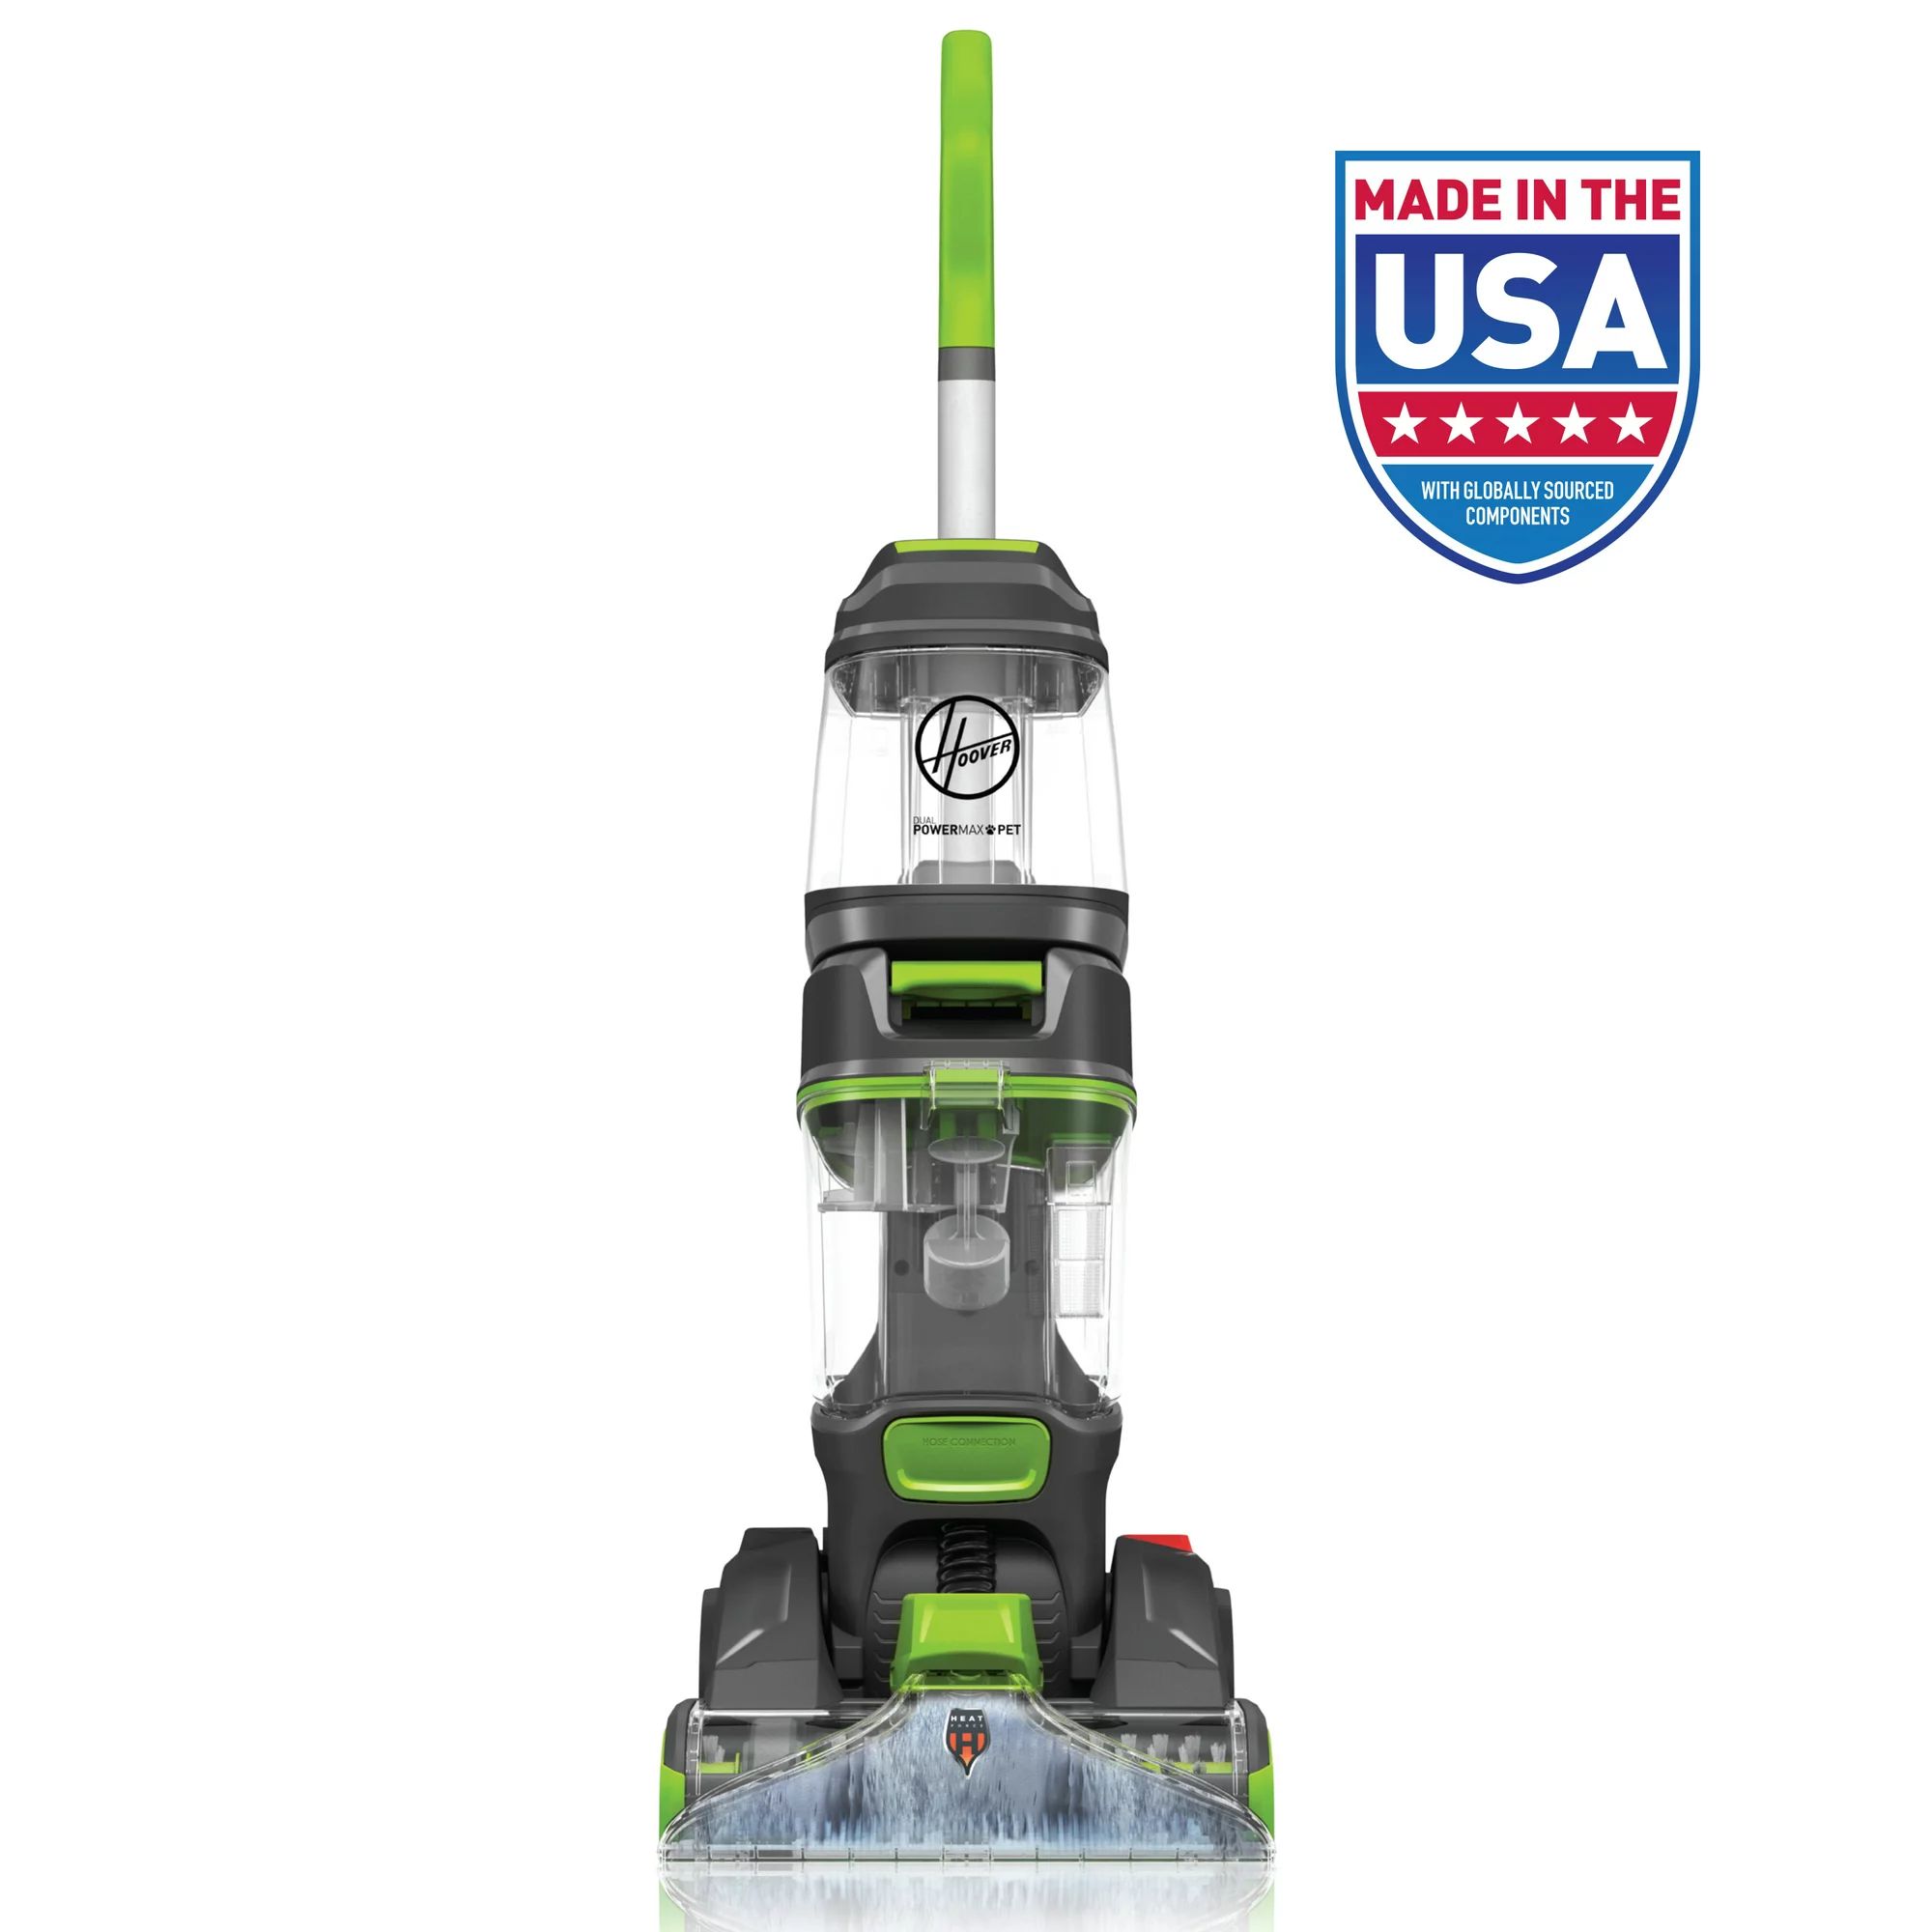 Hoover Dual Power Max Pet Carpet Cleaner with Antimicrobial Brushes, FH54010 | Walmart (US)